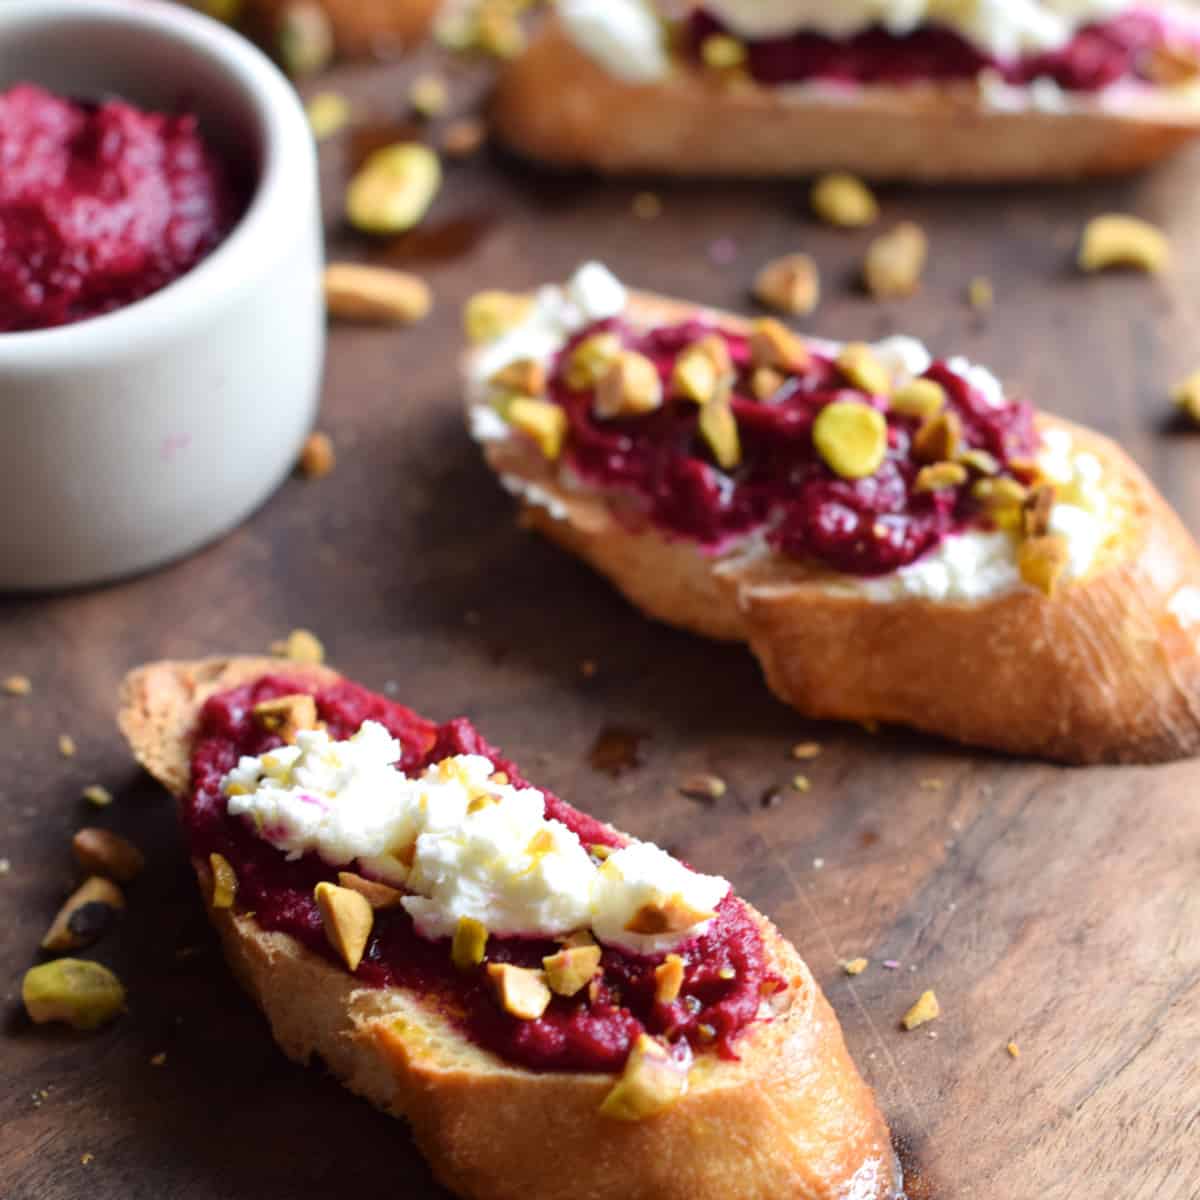 Roasted Beet Crostini with Goat Cheese and Pistachio on a wooden board.